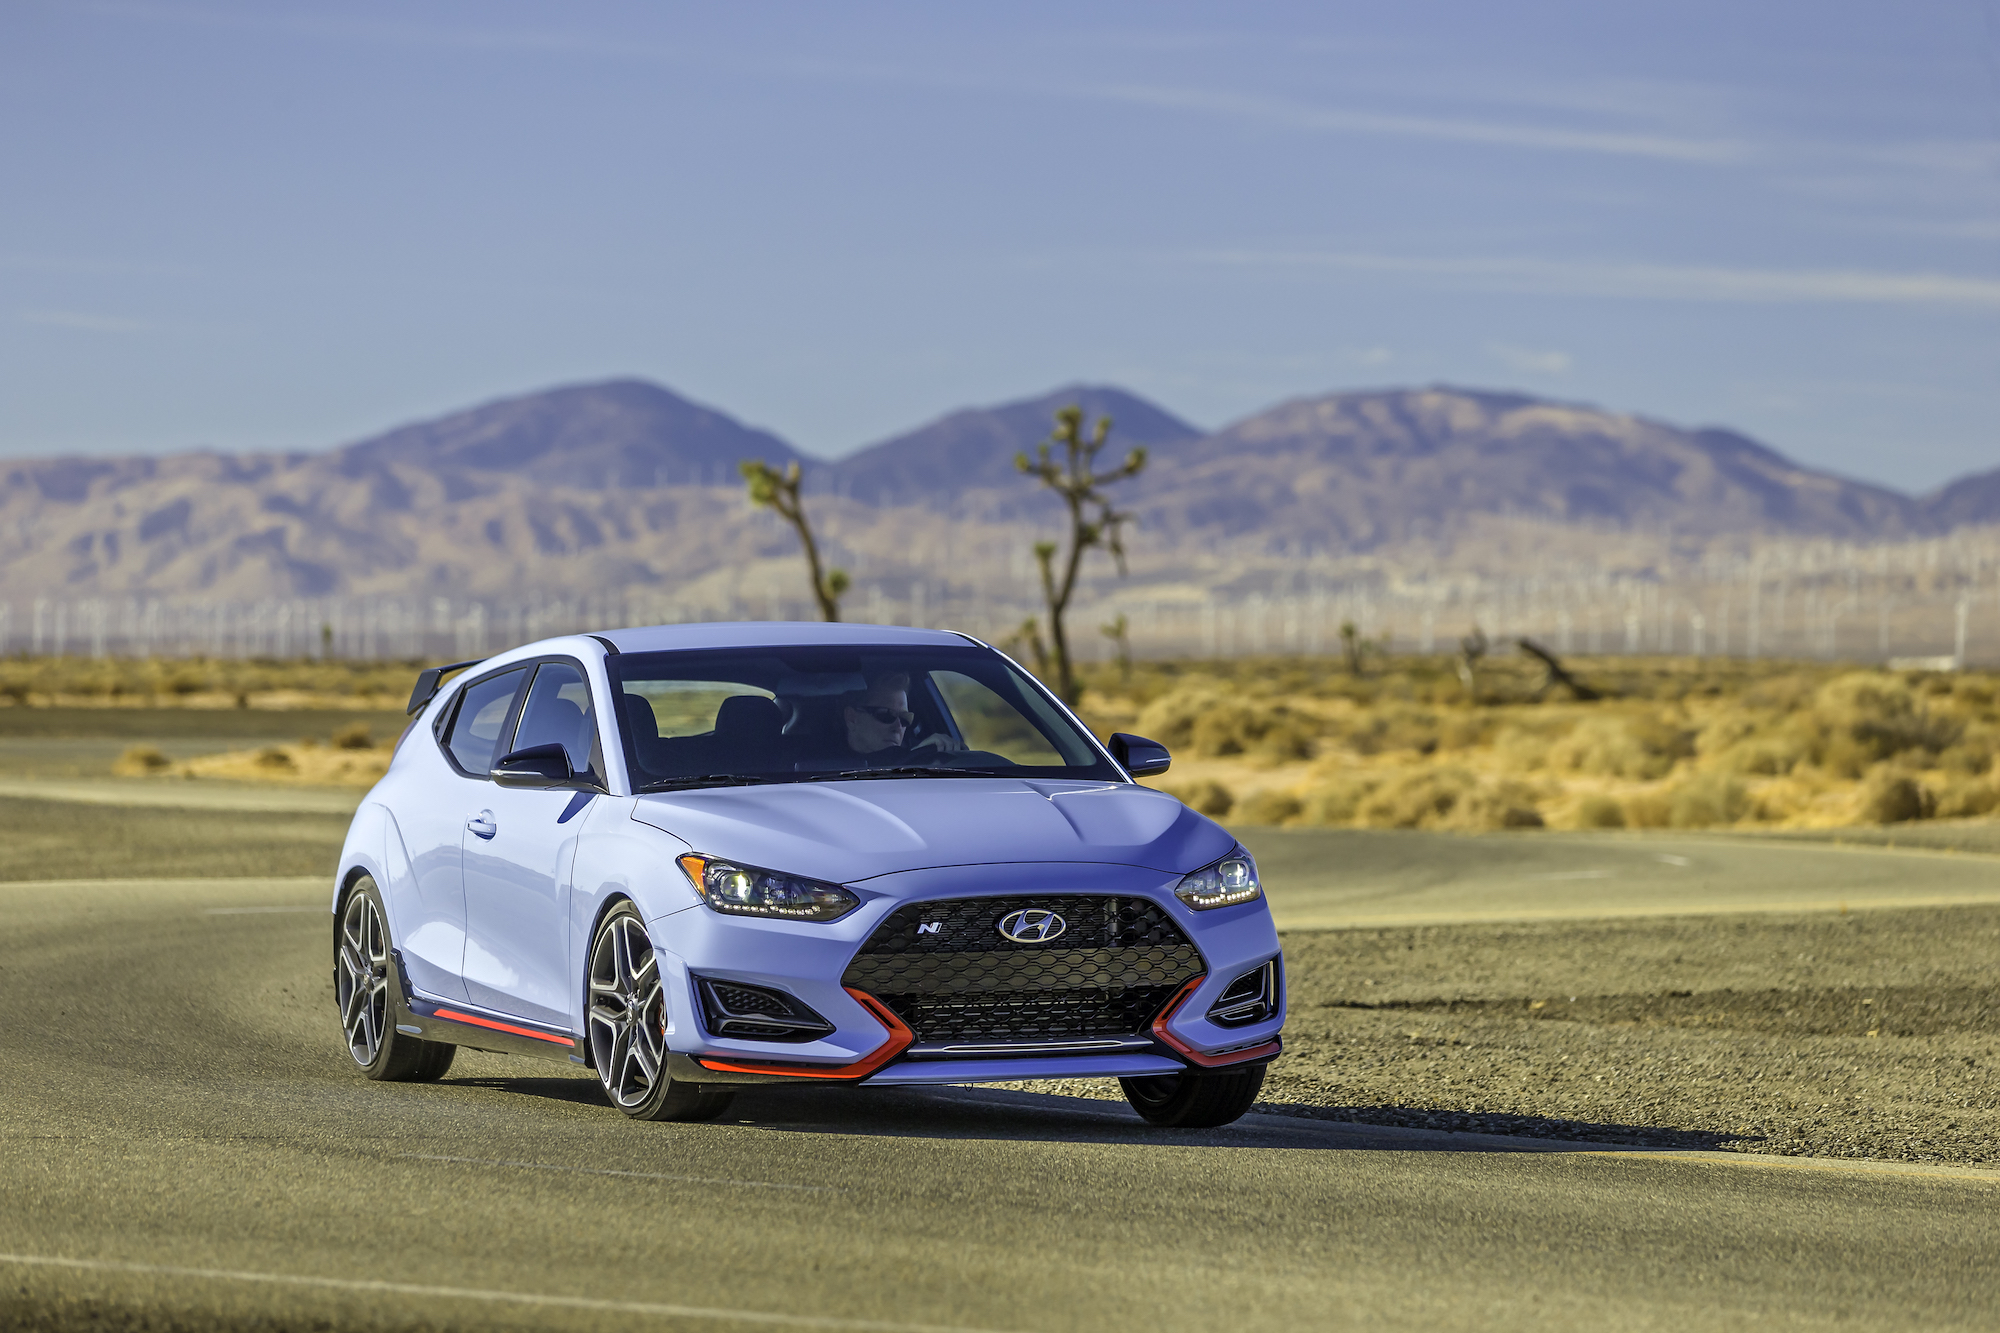 A sky-blue 2021 Hyundai Veloster N sports car travels on a winding road course in a desert